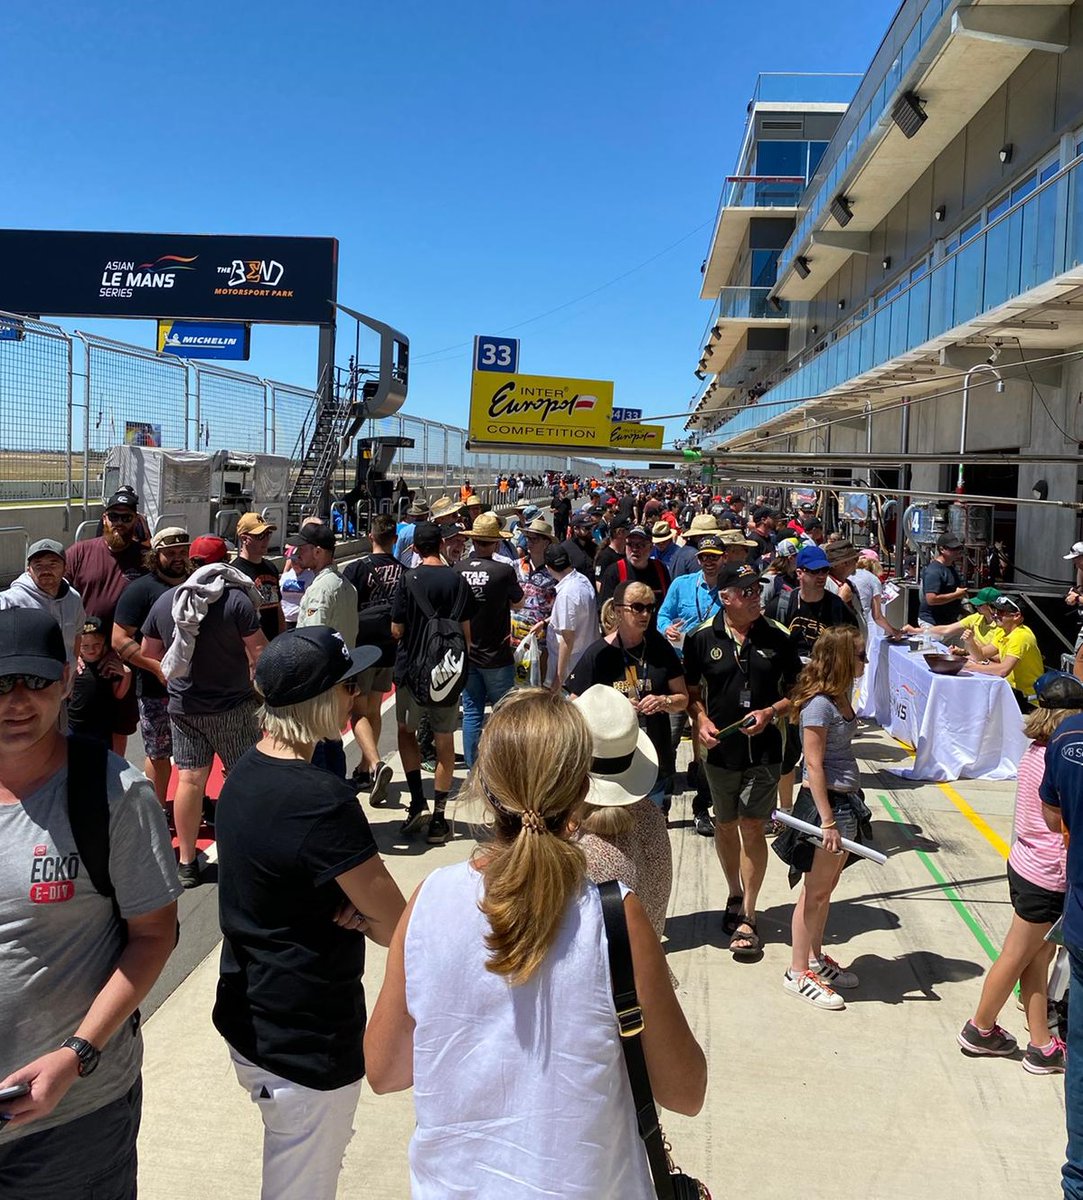 Pit walk done and just one hour until the 4 Hours of The Bend kicks off!

@AsianLMS #motorsport #pitwalk #sunnydays #seesouthaustralia